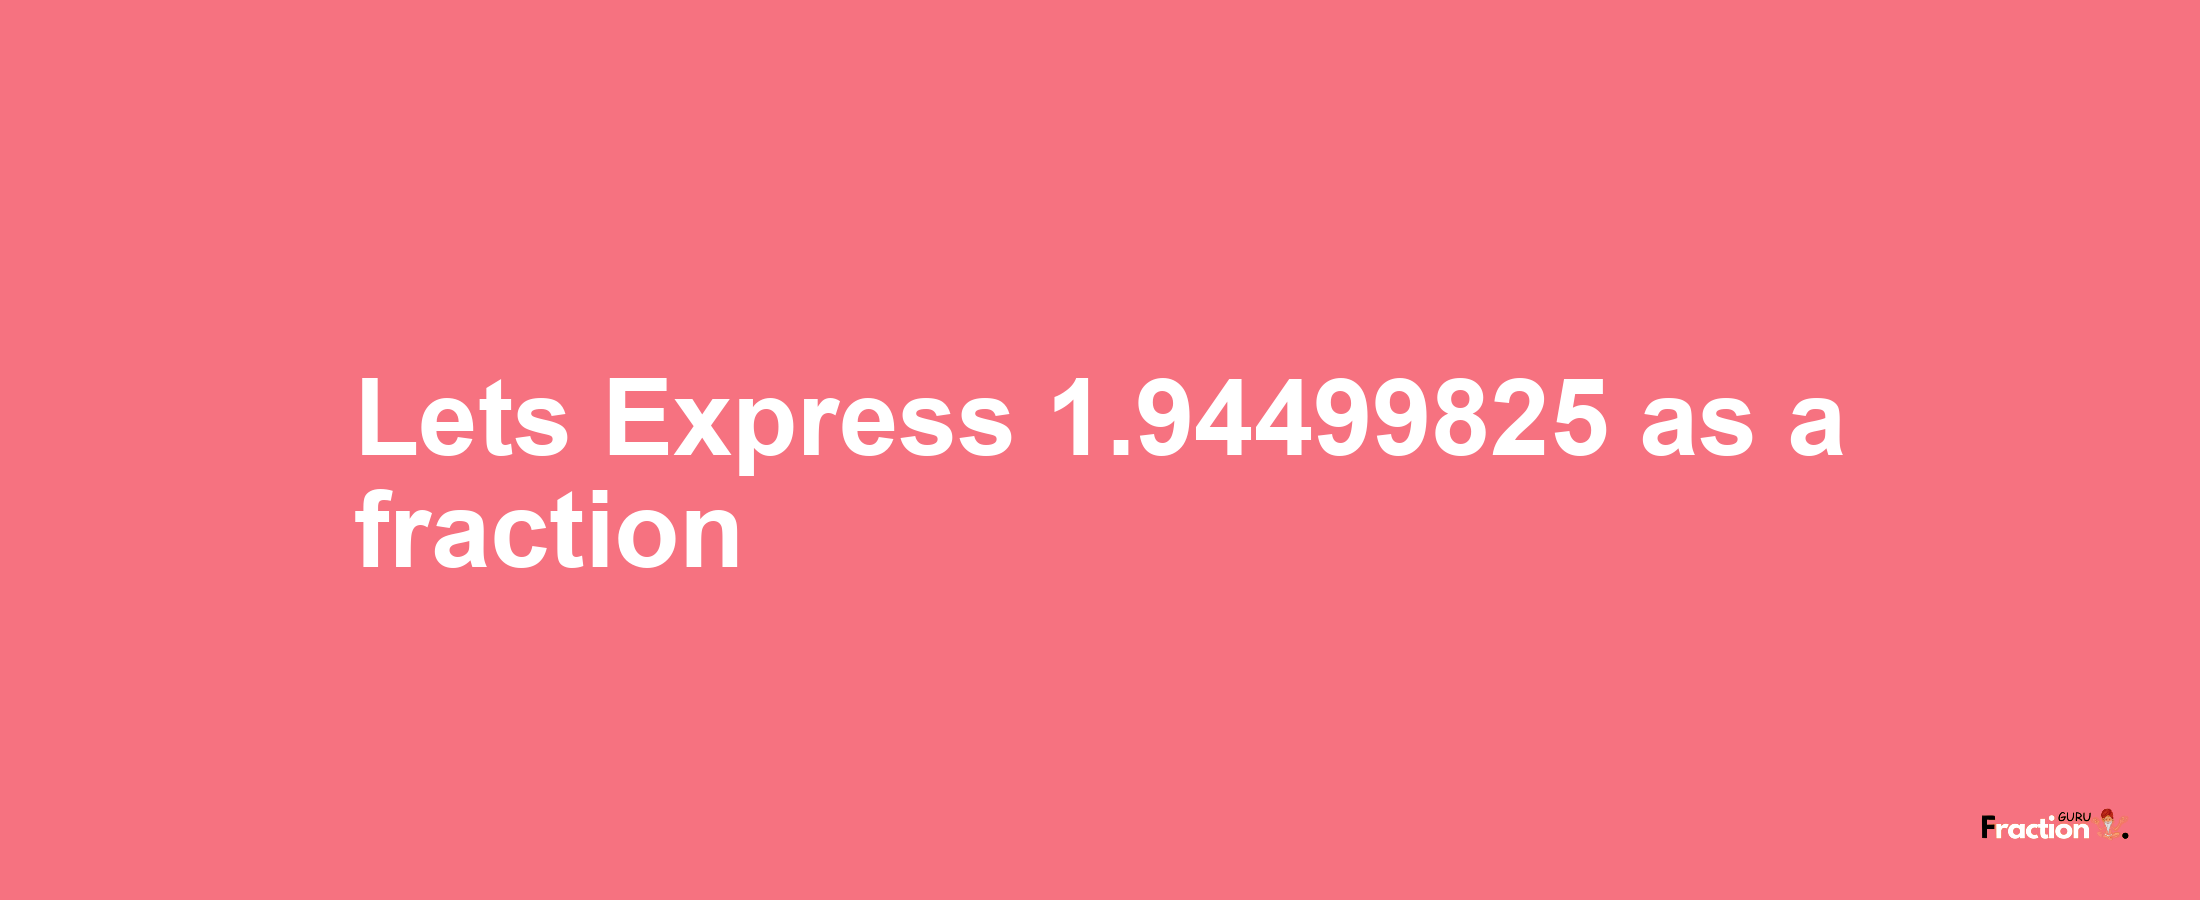 Lets Express 1.94499825 as afraction